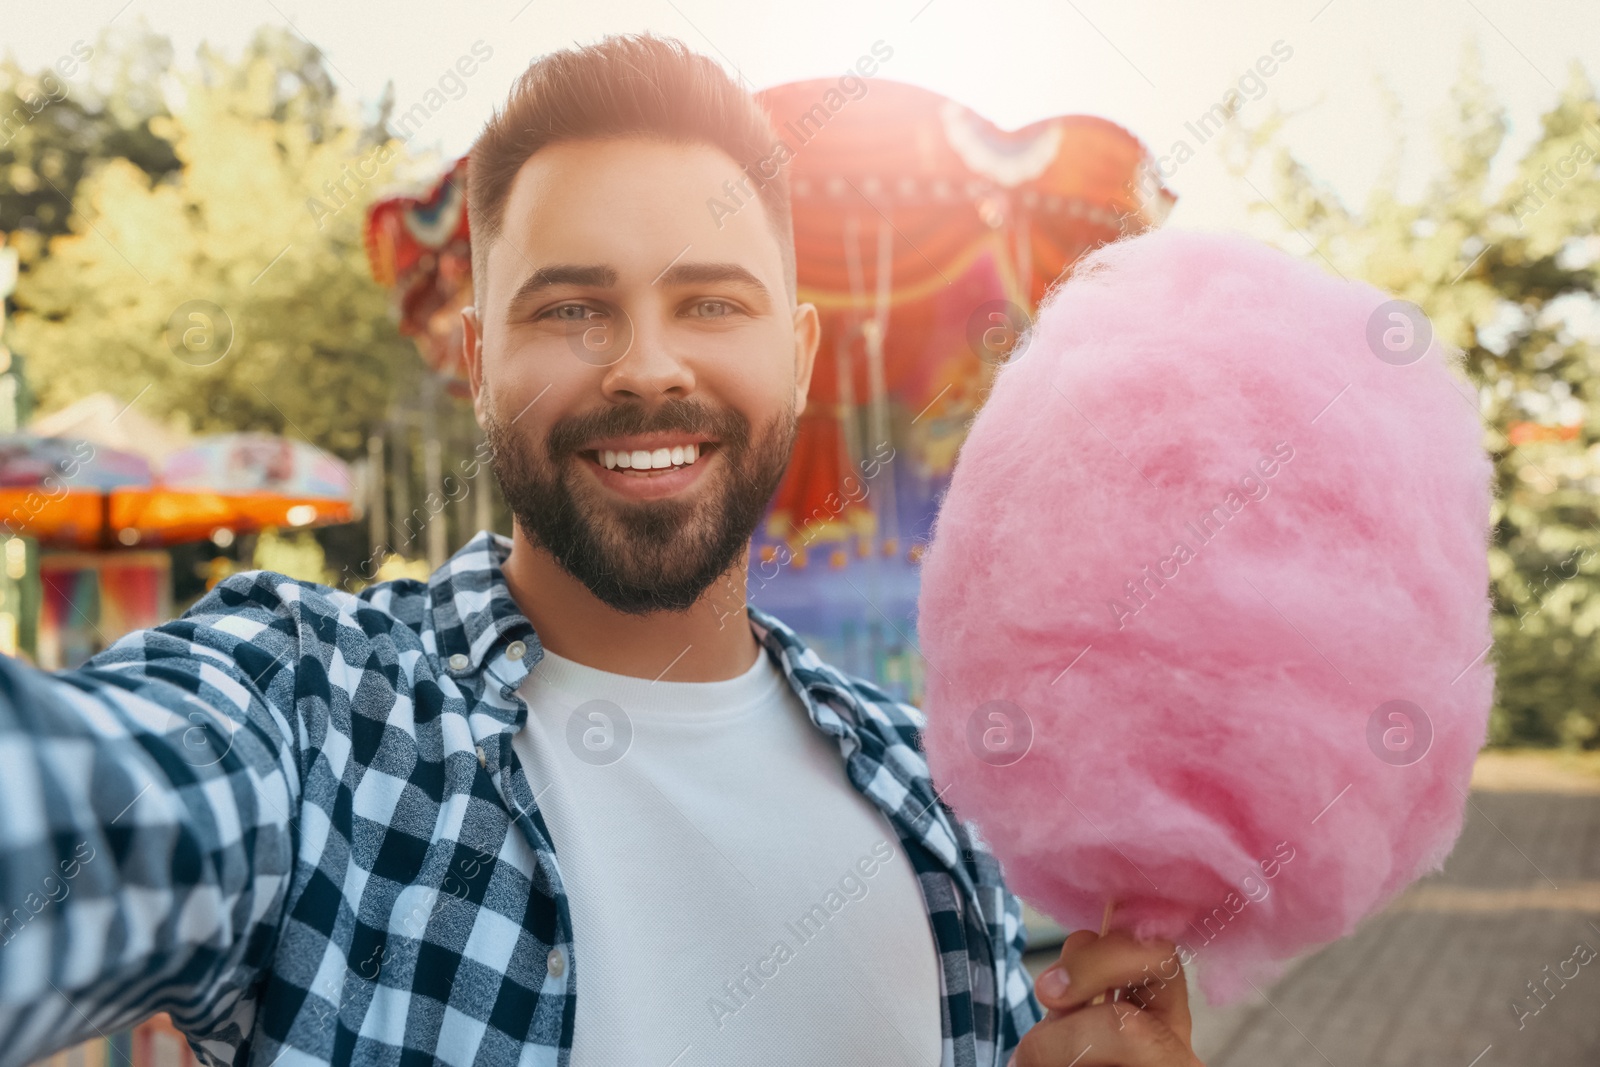 Image of Happy young man with cotton candy taking selfie at funfair on sunny day